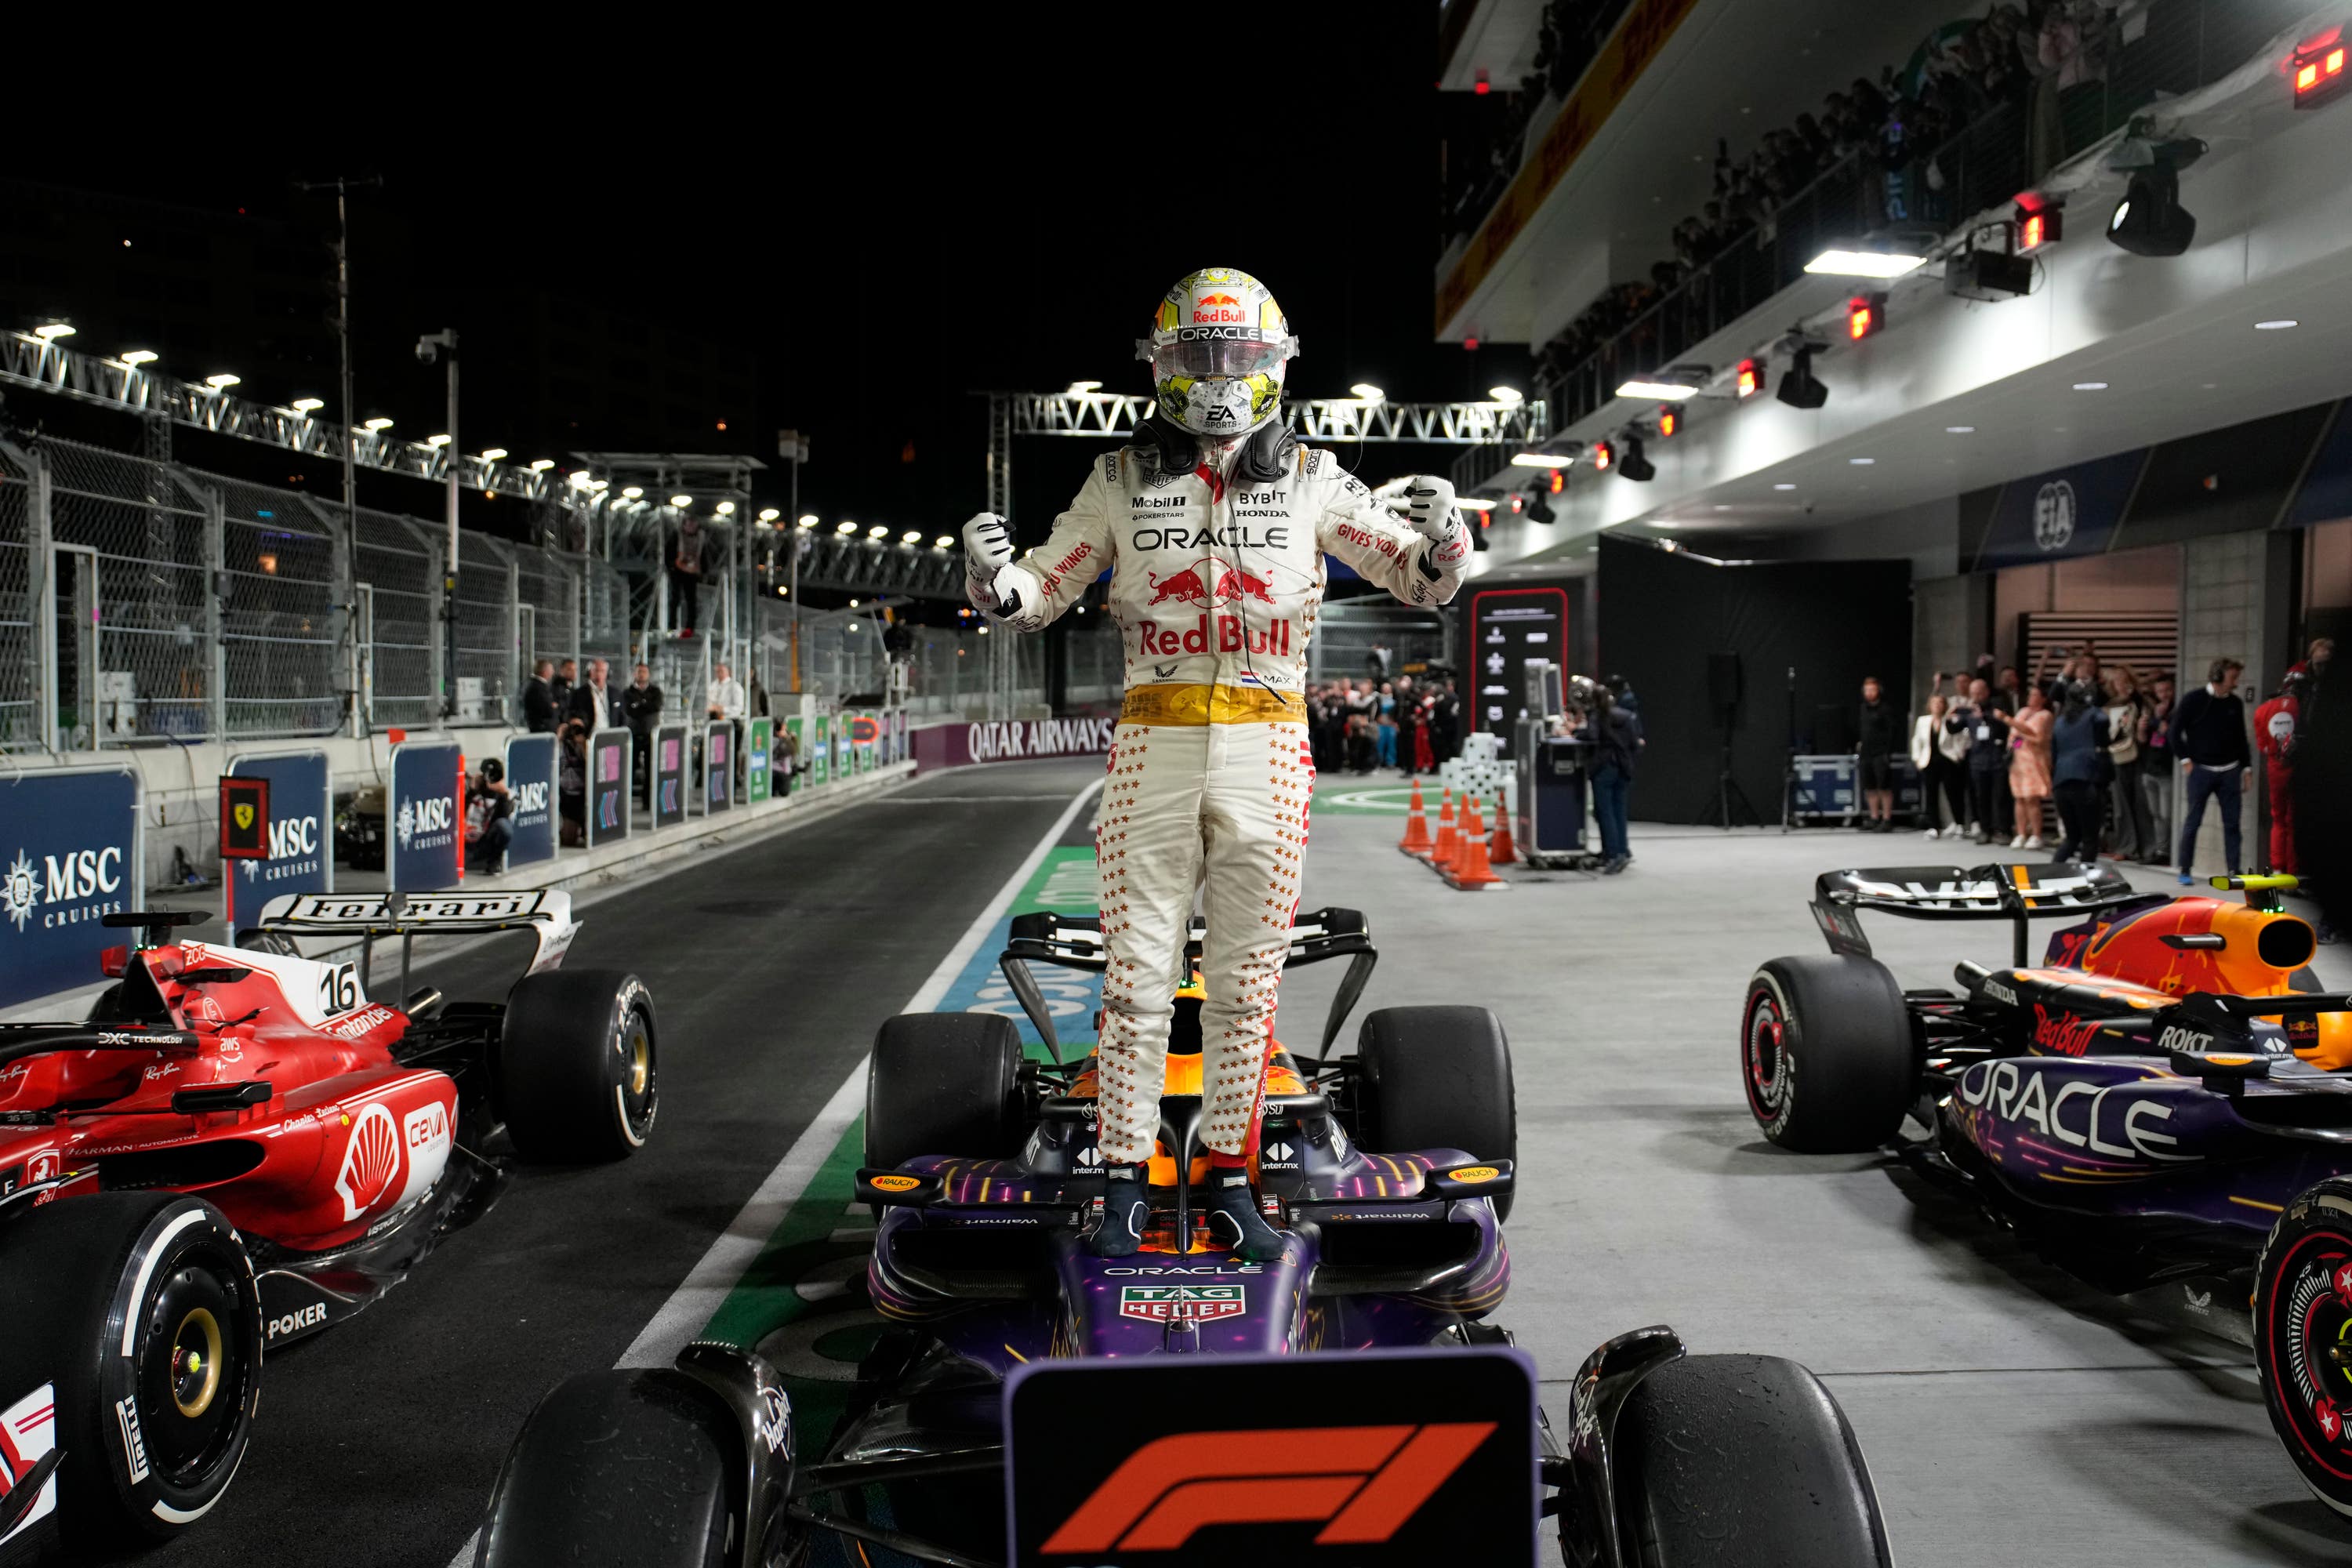 Red Bull driver Max Verstappen stands on top of his car after winning the Formula One Las Vegas Grand Prix.